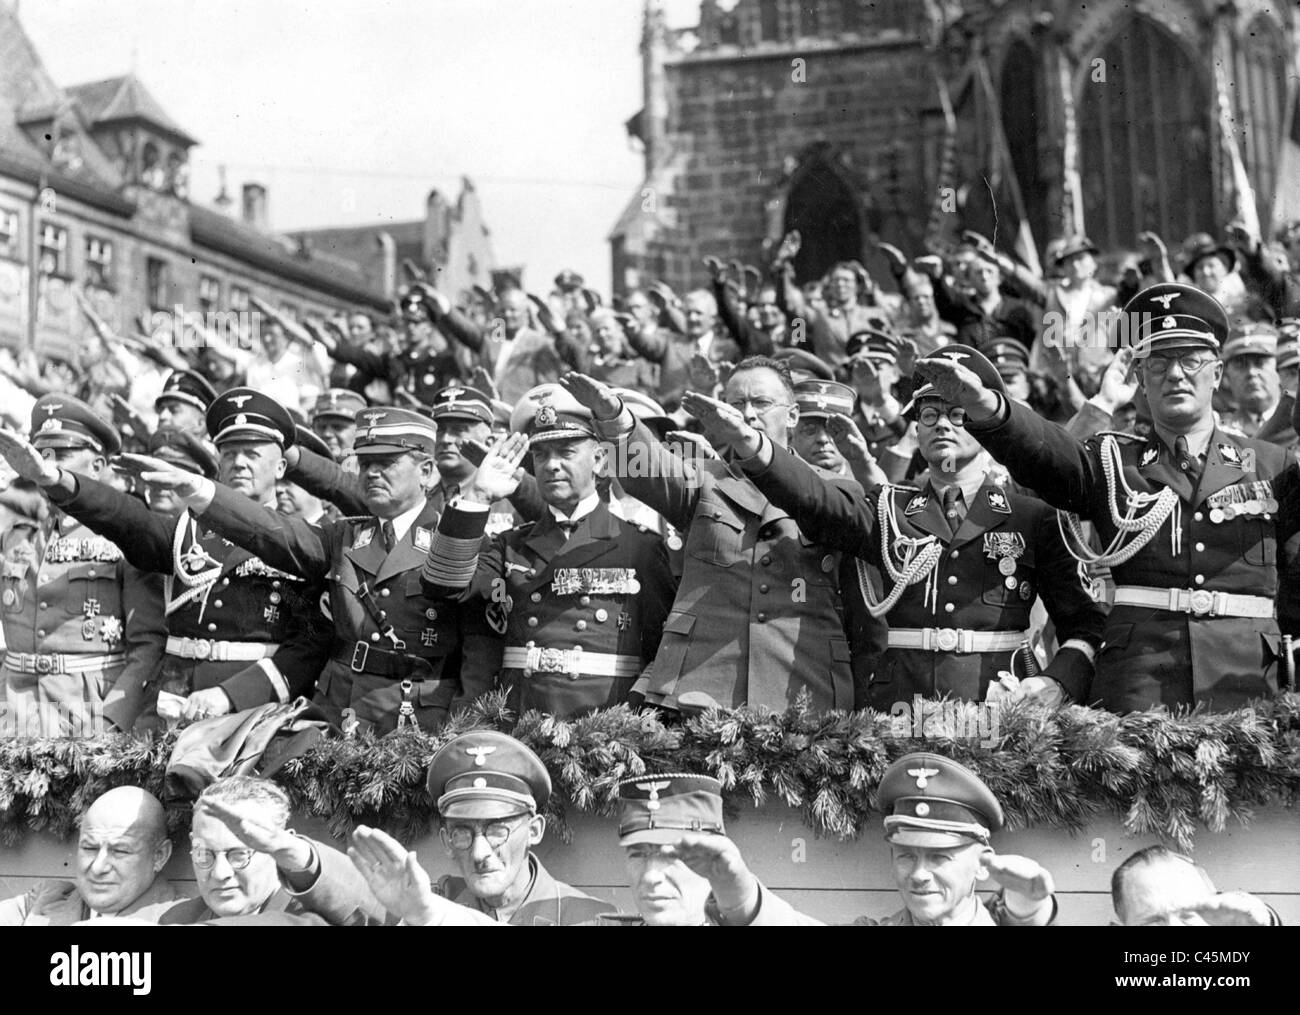 Seyss-Inquart Henlein, Raeder and Ohnesorge during the Nuremberg Rally, 1938 Stock Photo